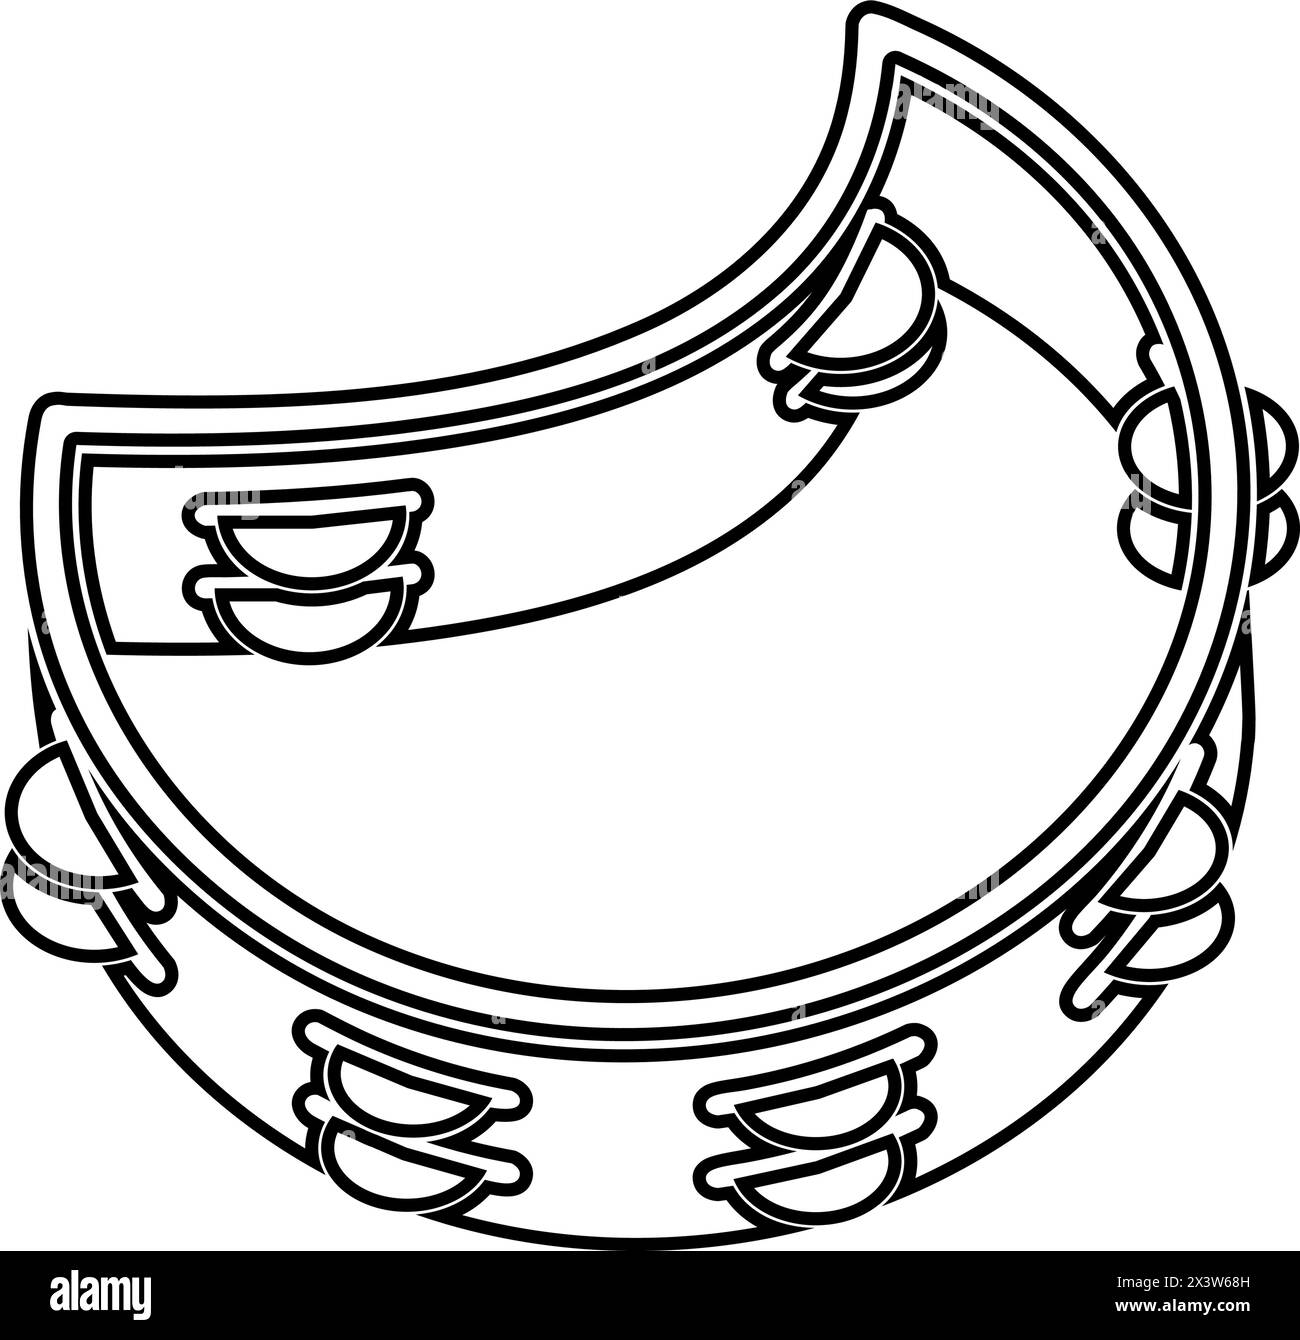 A tambourine musical instrument in line art style vector Stock Vector